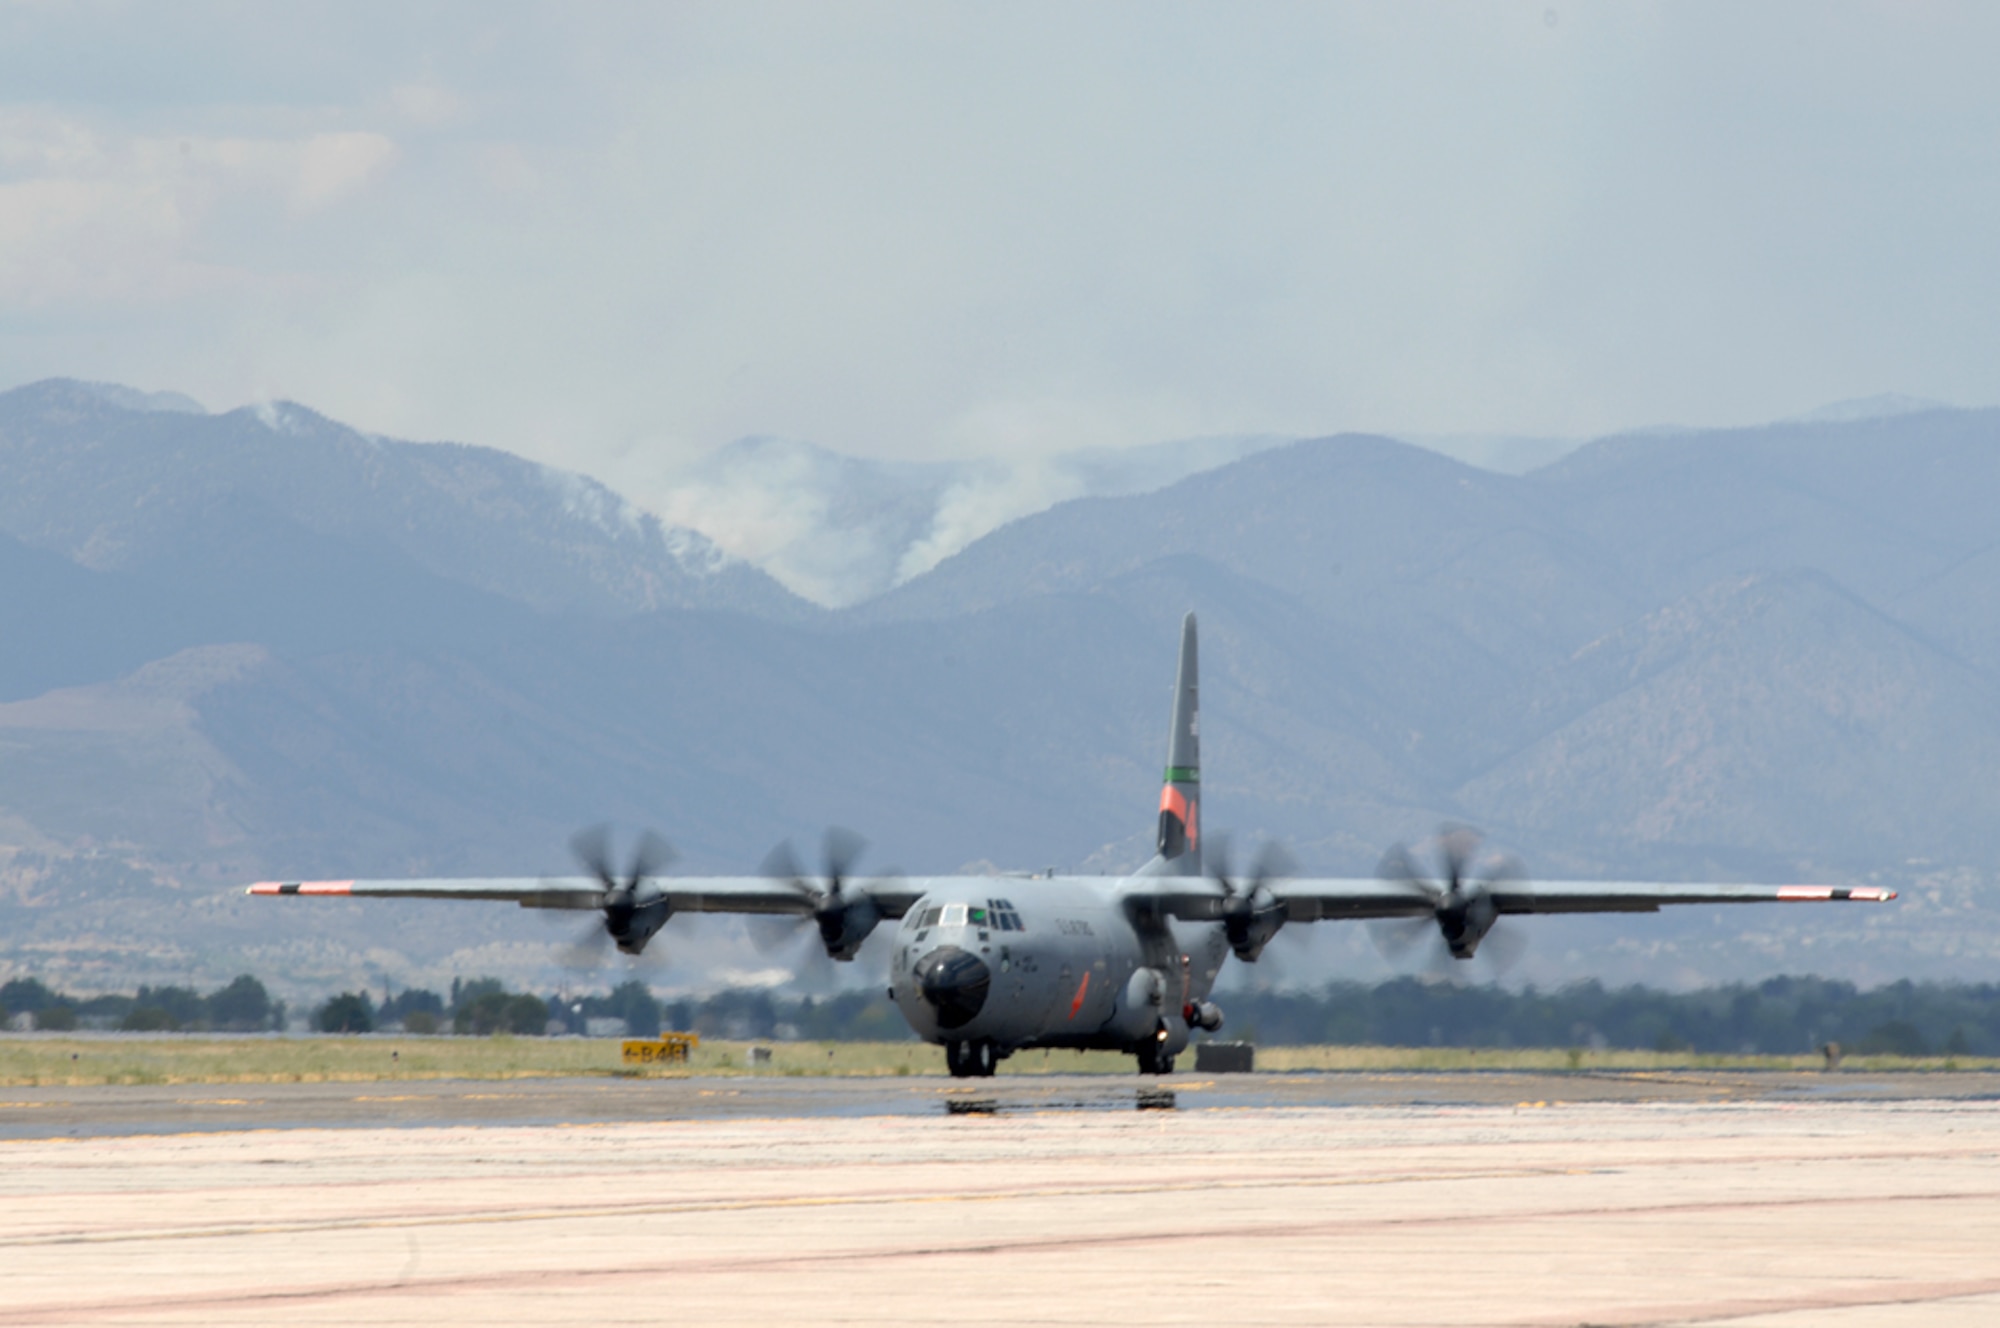 A Modular Airborne Fire Fighting System-equipped C-130 from the California Air National Guard's 146th Airlift Wing arrives June 30 at Peterson Air Force Base, Colo., to support wildland fire fighting operations in the western United States. Four MAFFS units are scheduled to arrive June 30, joining four already operating from this southern Colorado air force base. The eight MAFFS units constitute the entire U.S. military's MAFFS fleet. (U.S. Air Force photo/Tech. Sgt. Thomas J. Doscher)